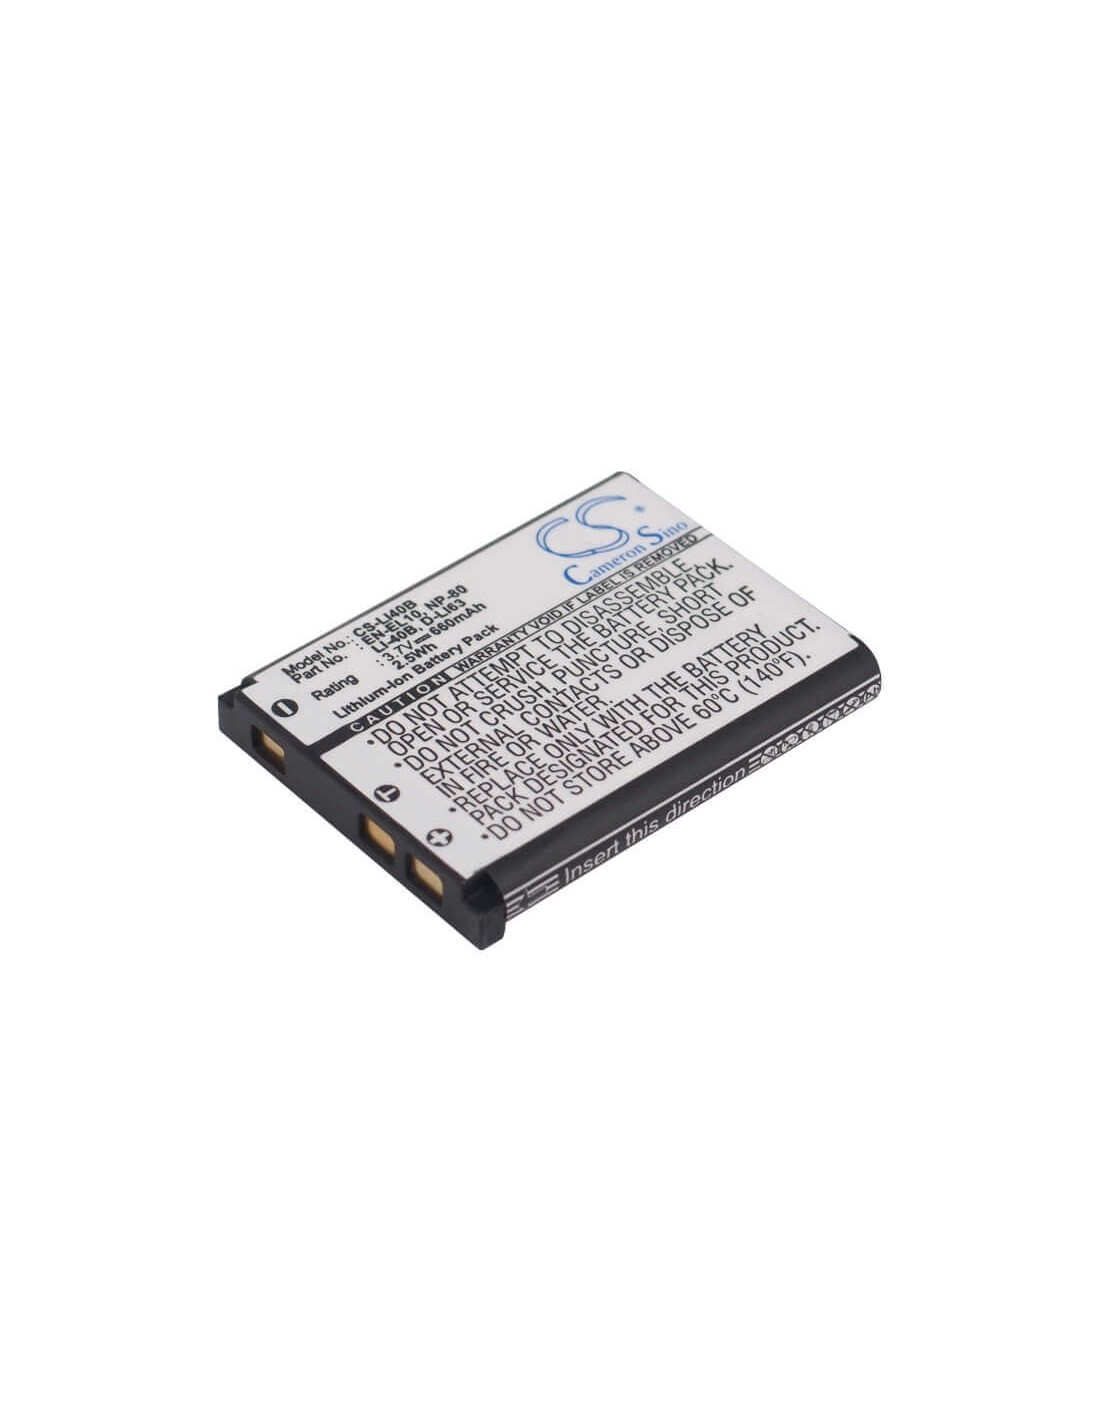 Battery for Revue Dc 7xs, Dc 8xs 3.7V, 660mAh - 2.44Wh